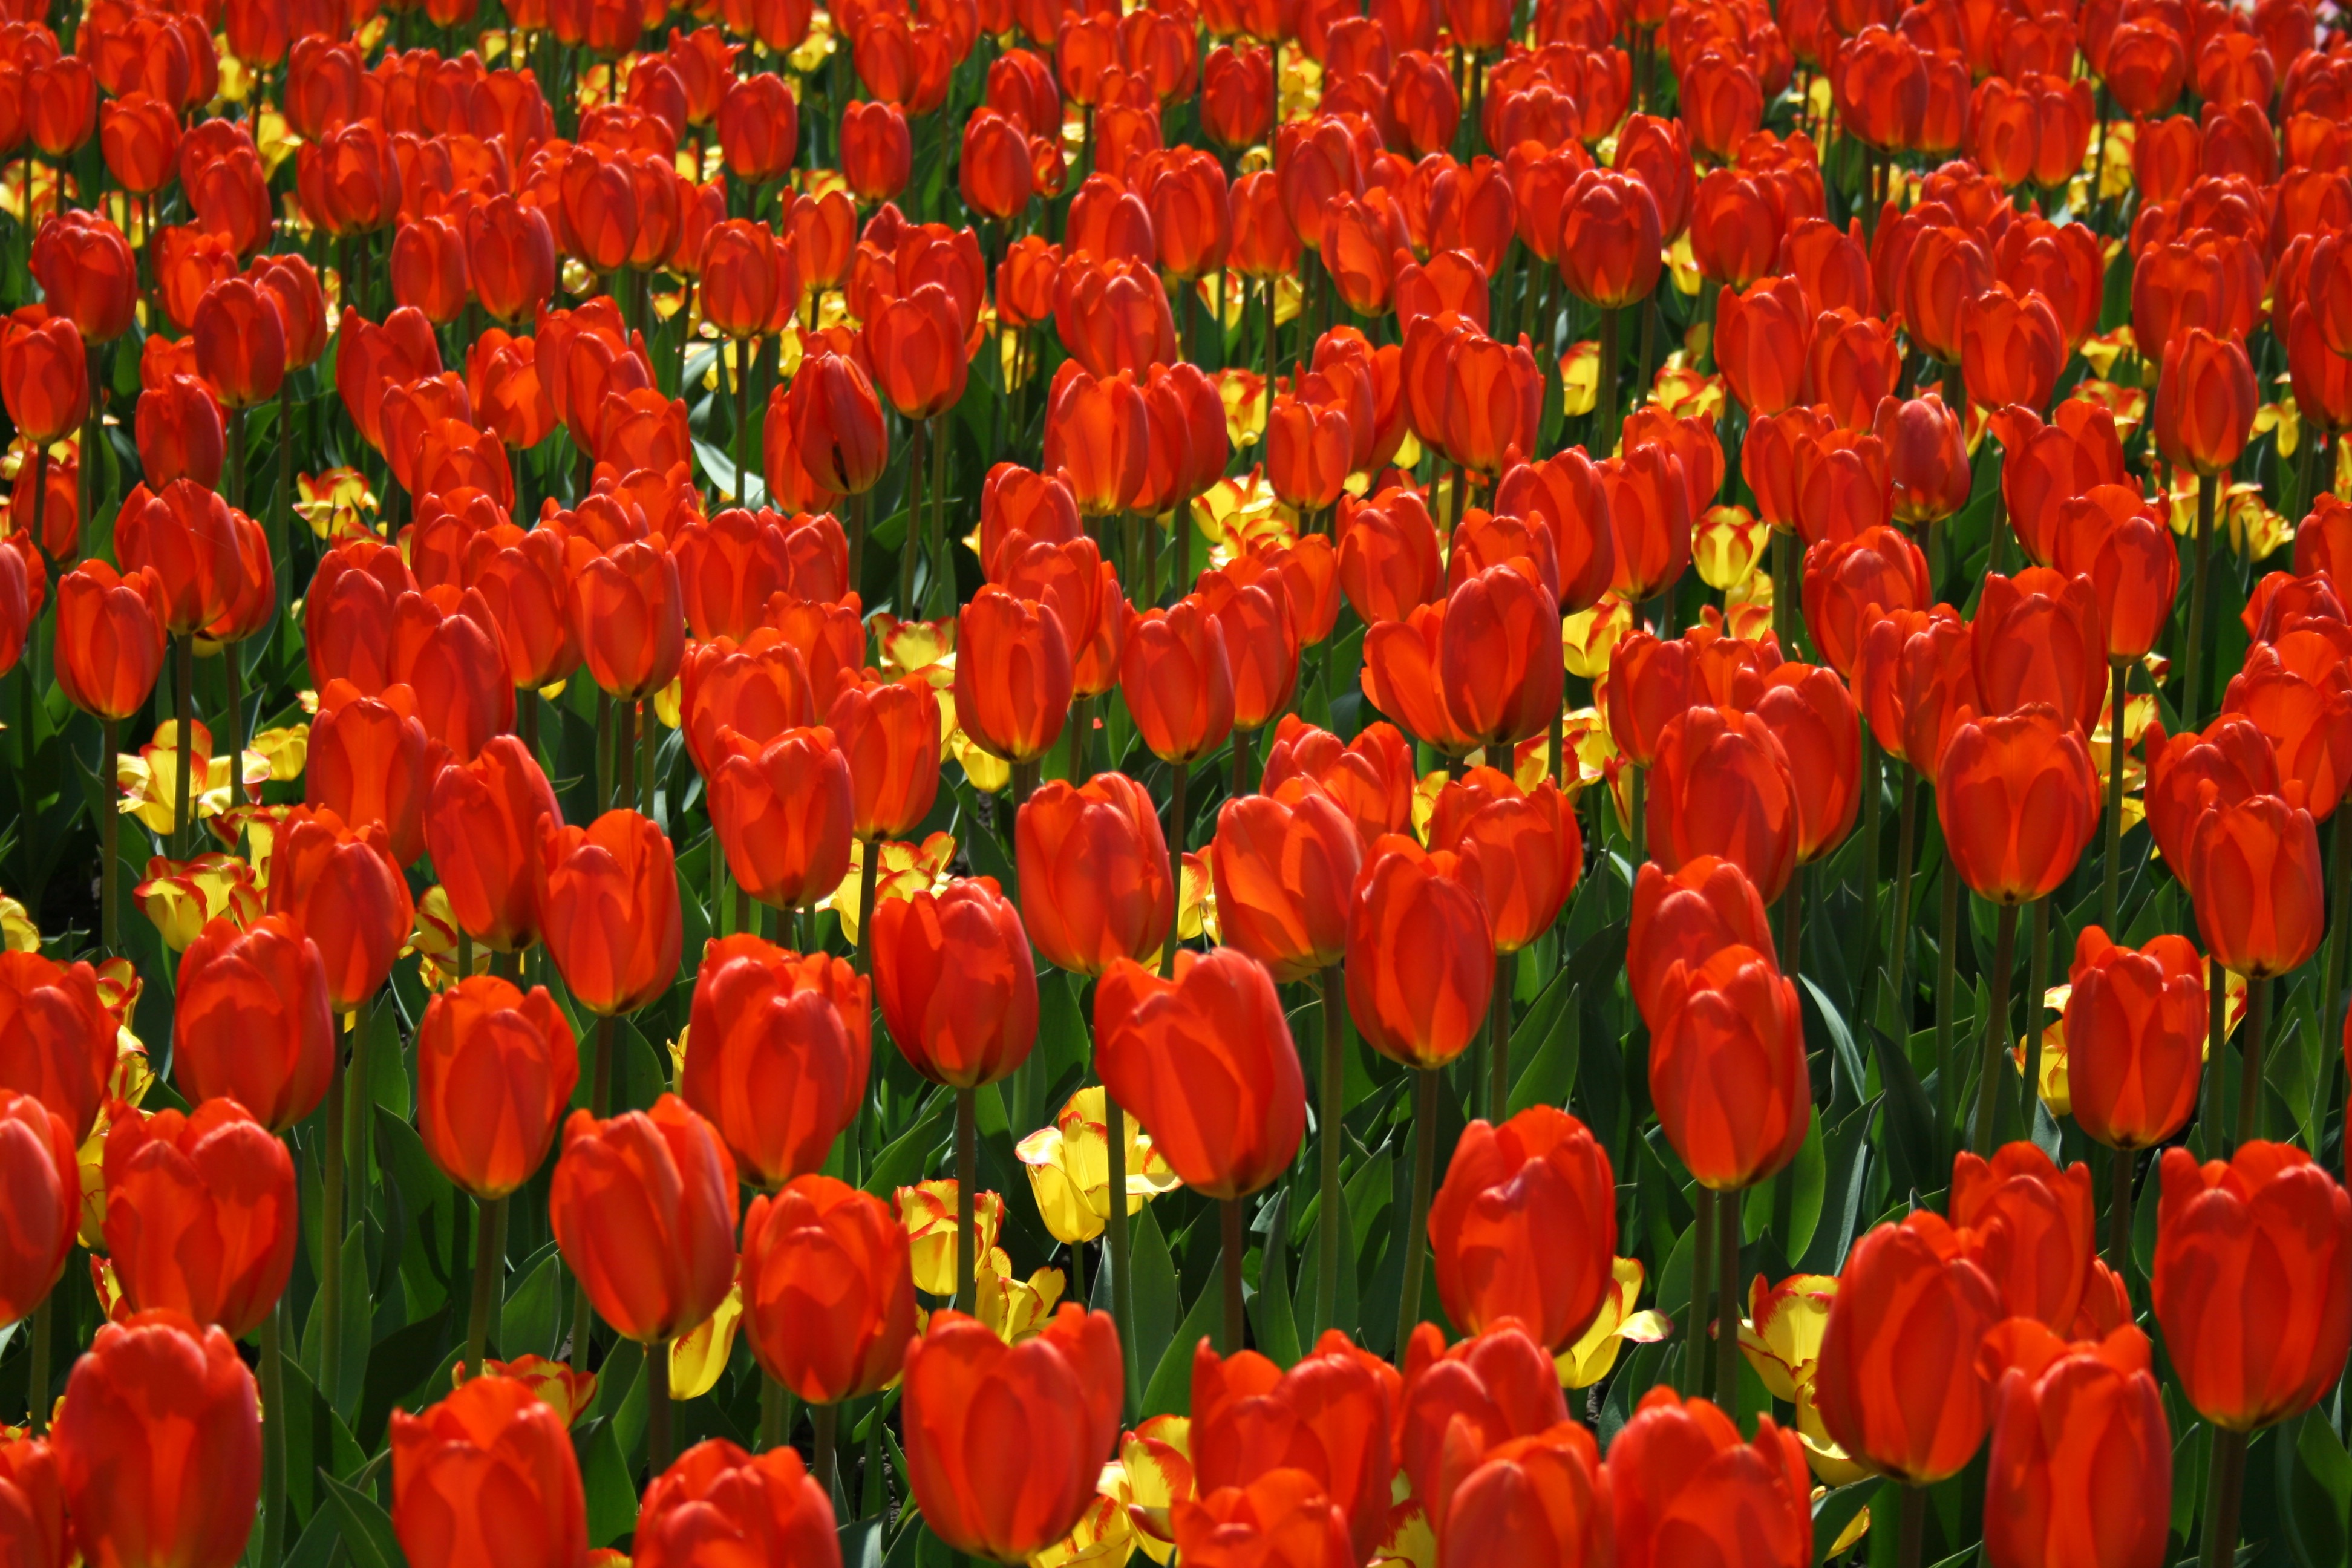 Free Virtual Backgrounds, Flower Zoom Backgrounds